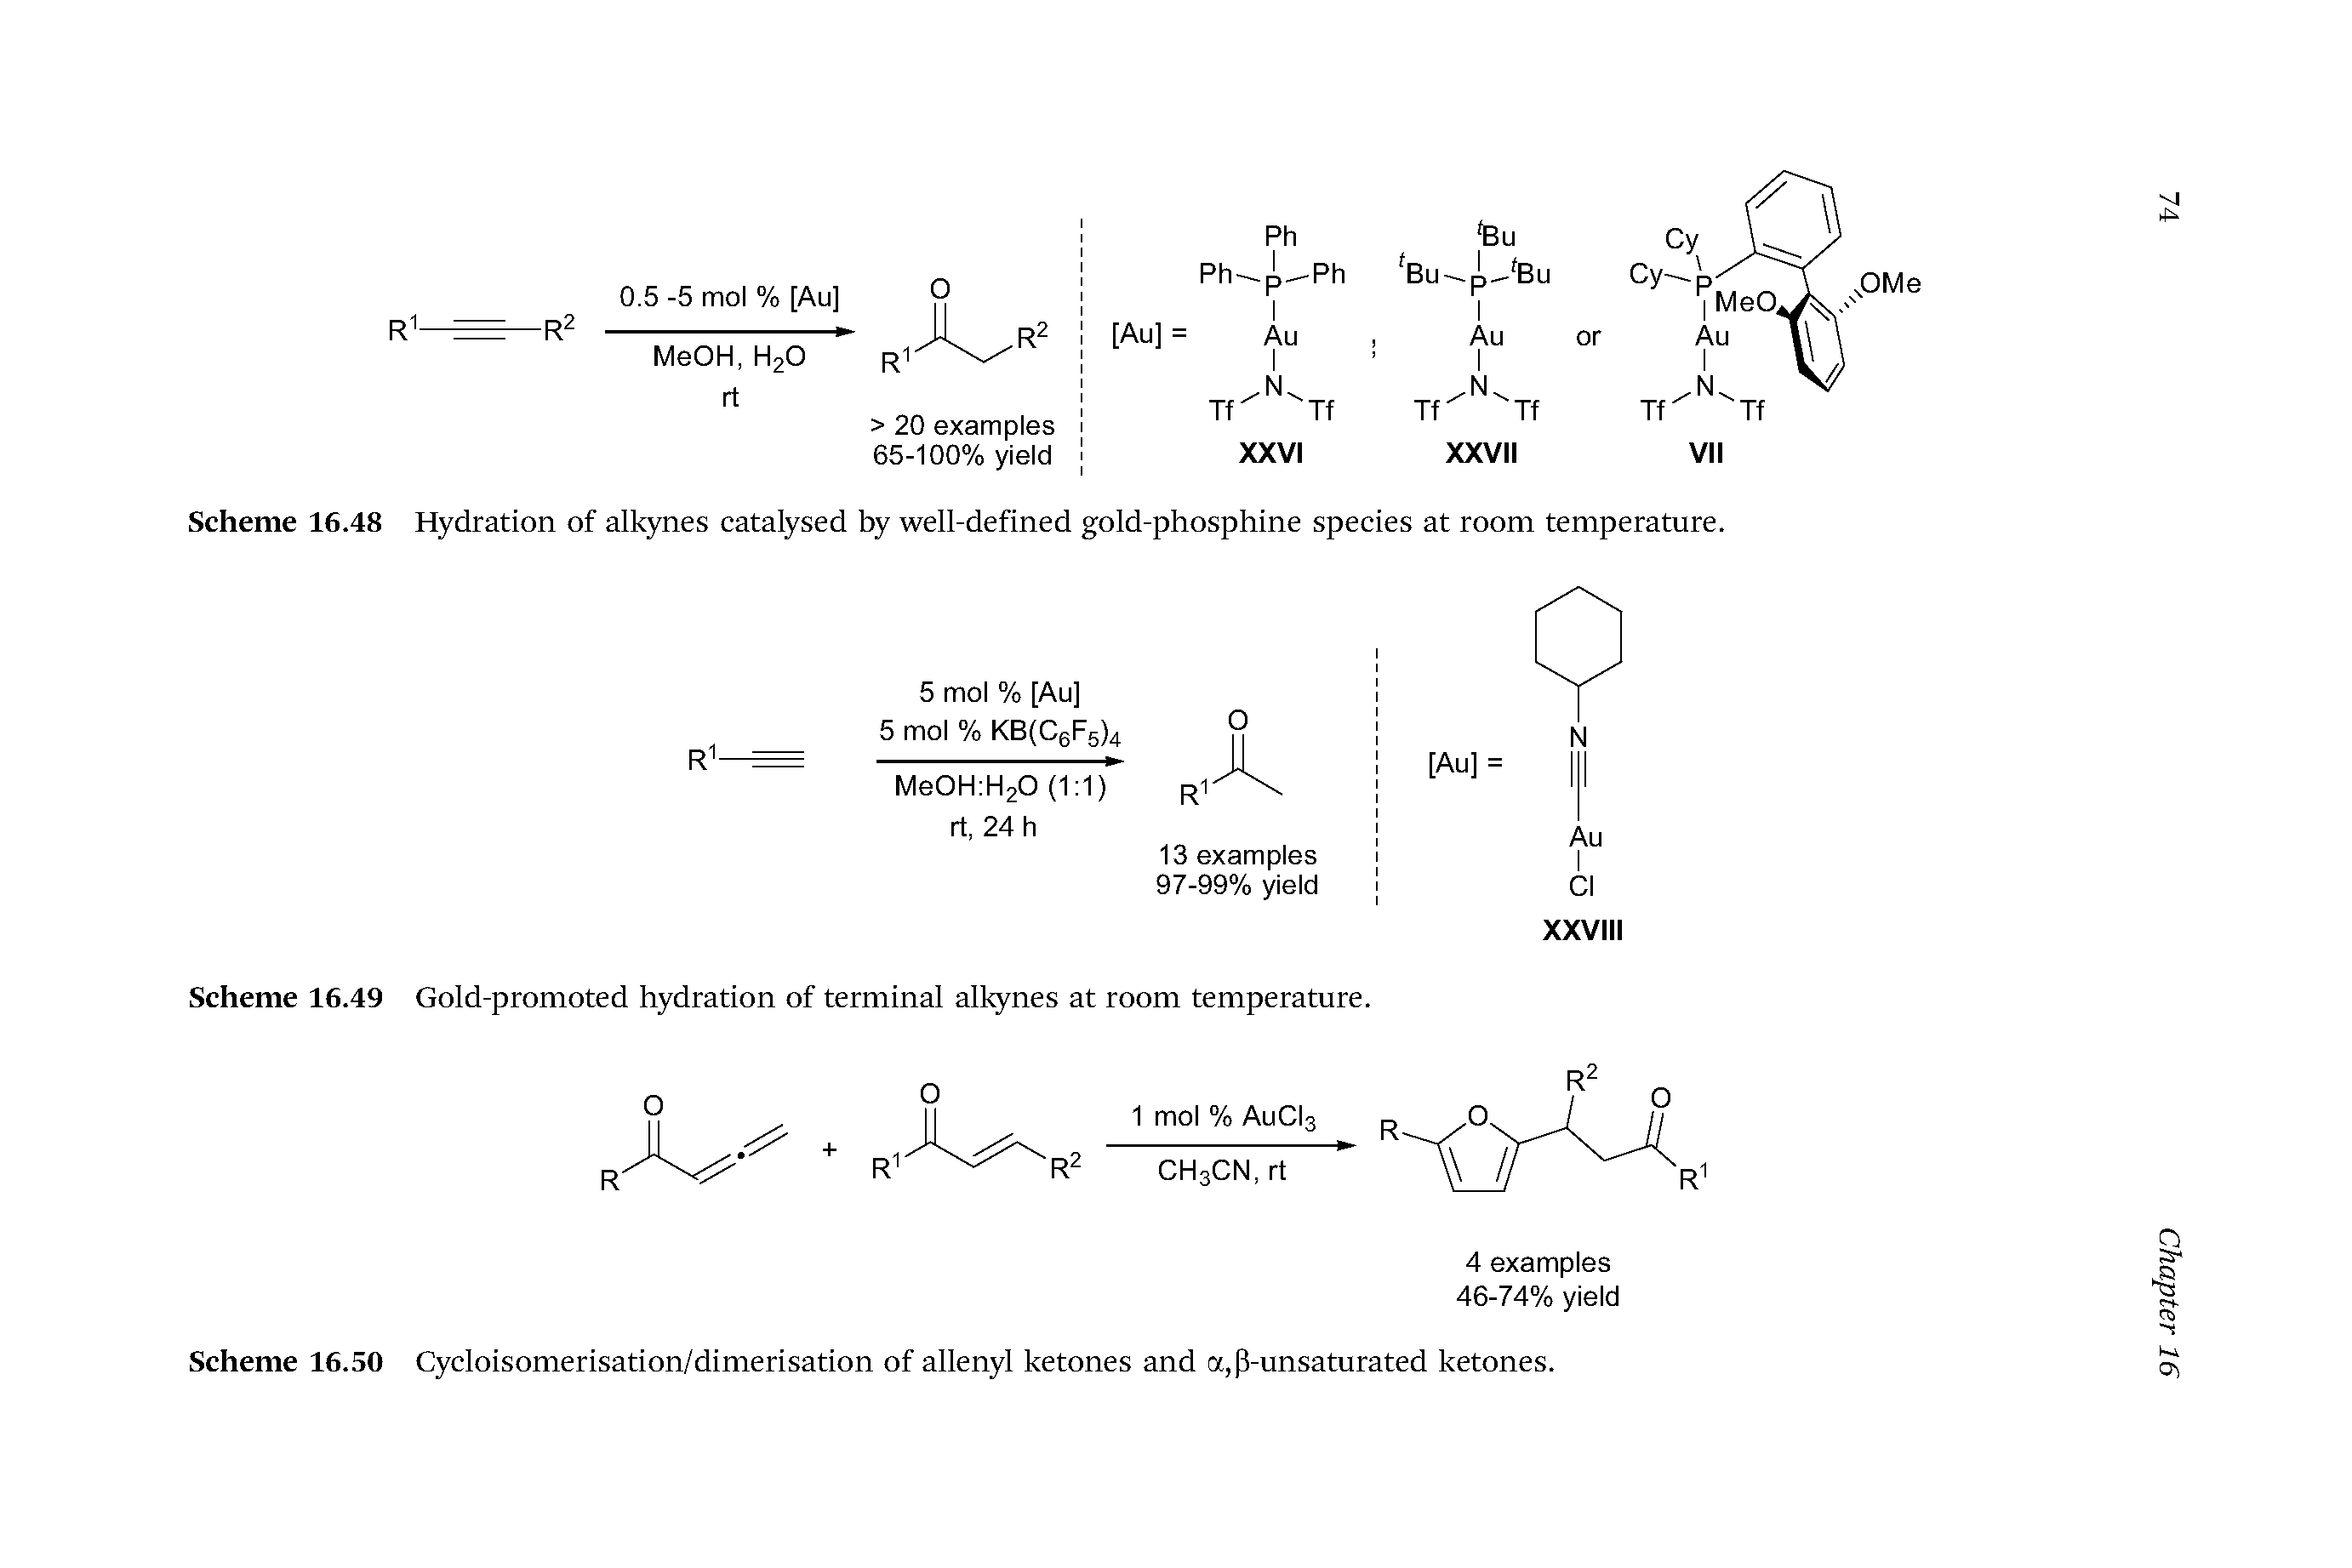 Scheme 16.48 Hydration of alkynes catalysed by well-defined gold-phosphine species at room temperature.